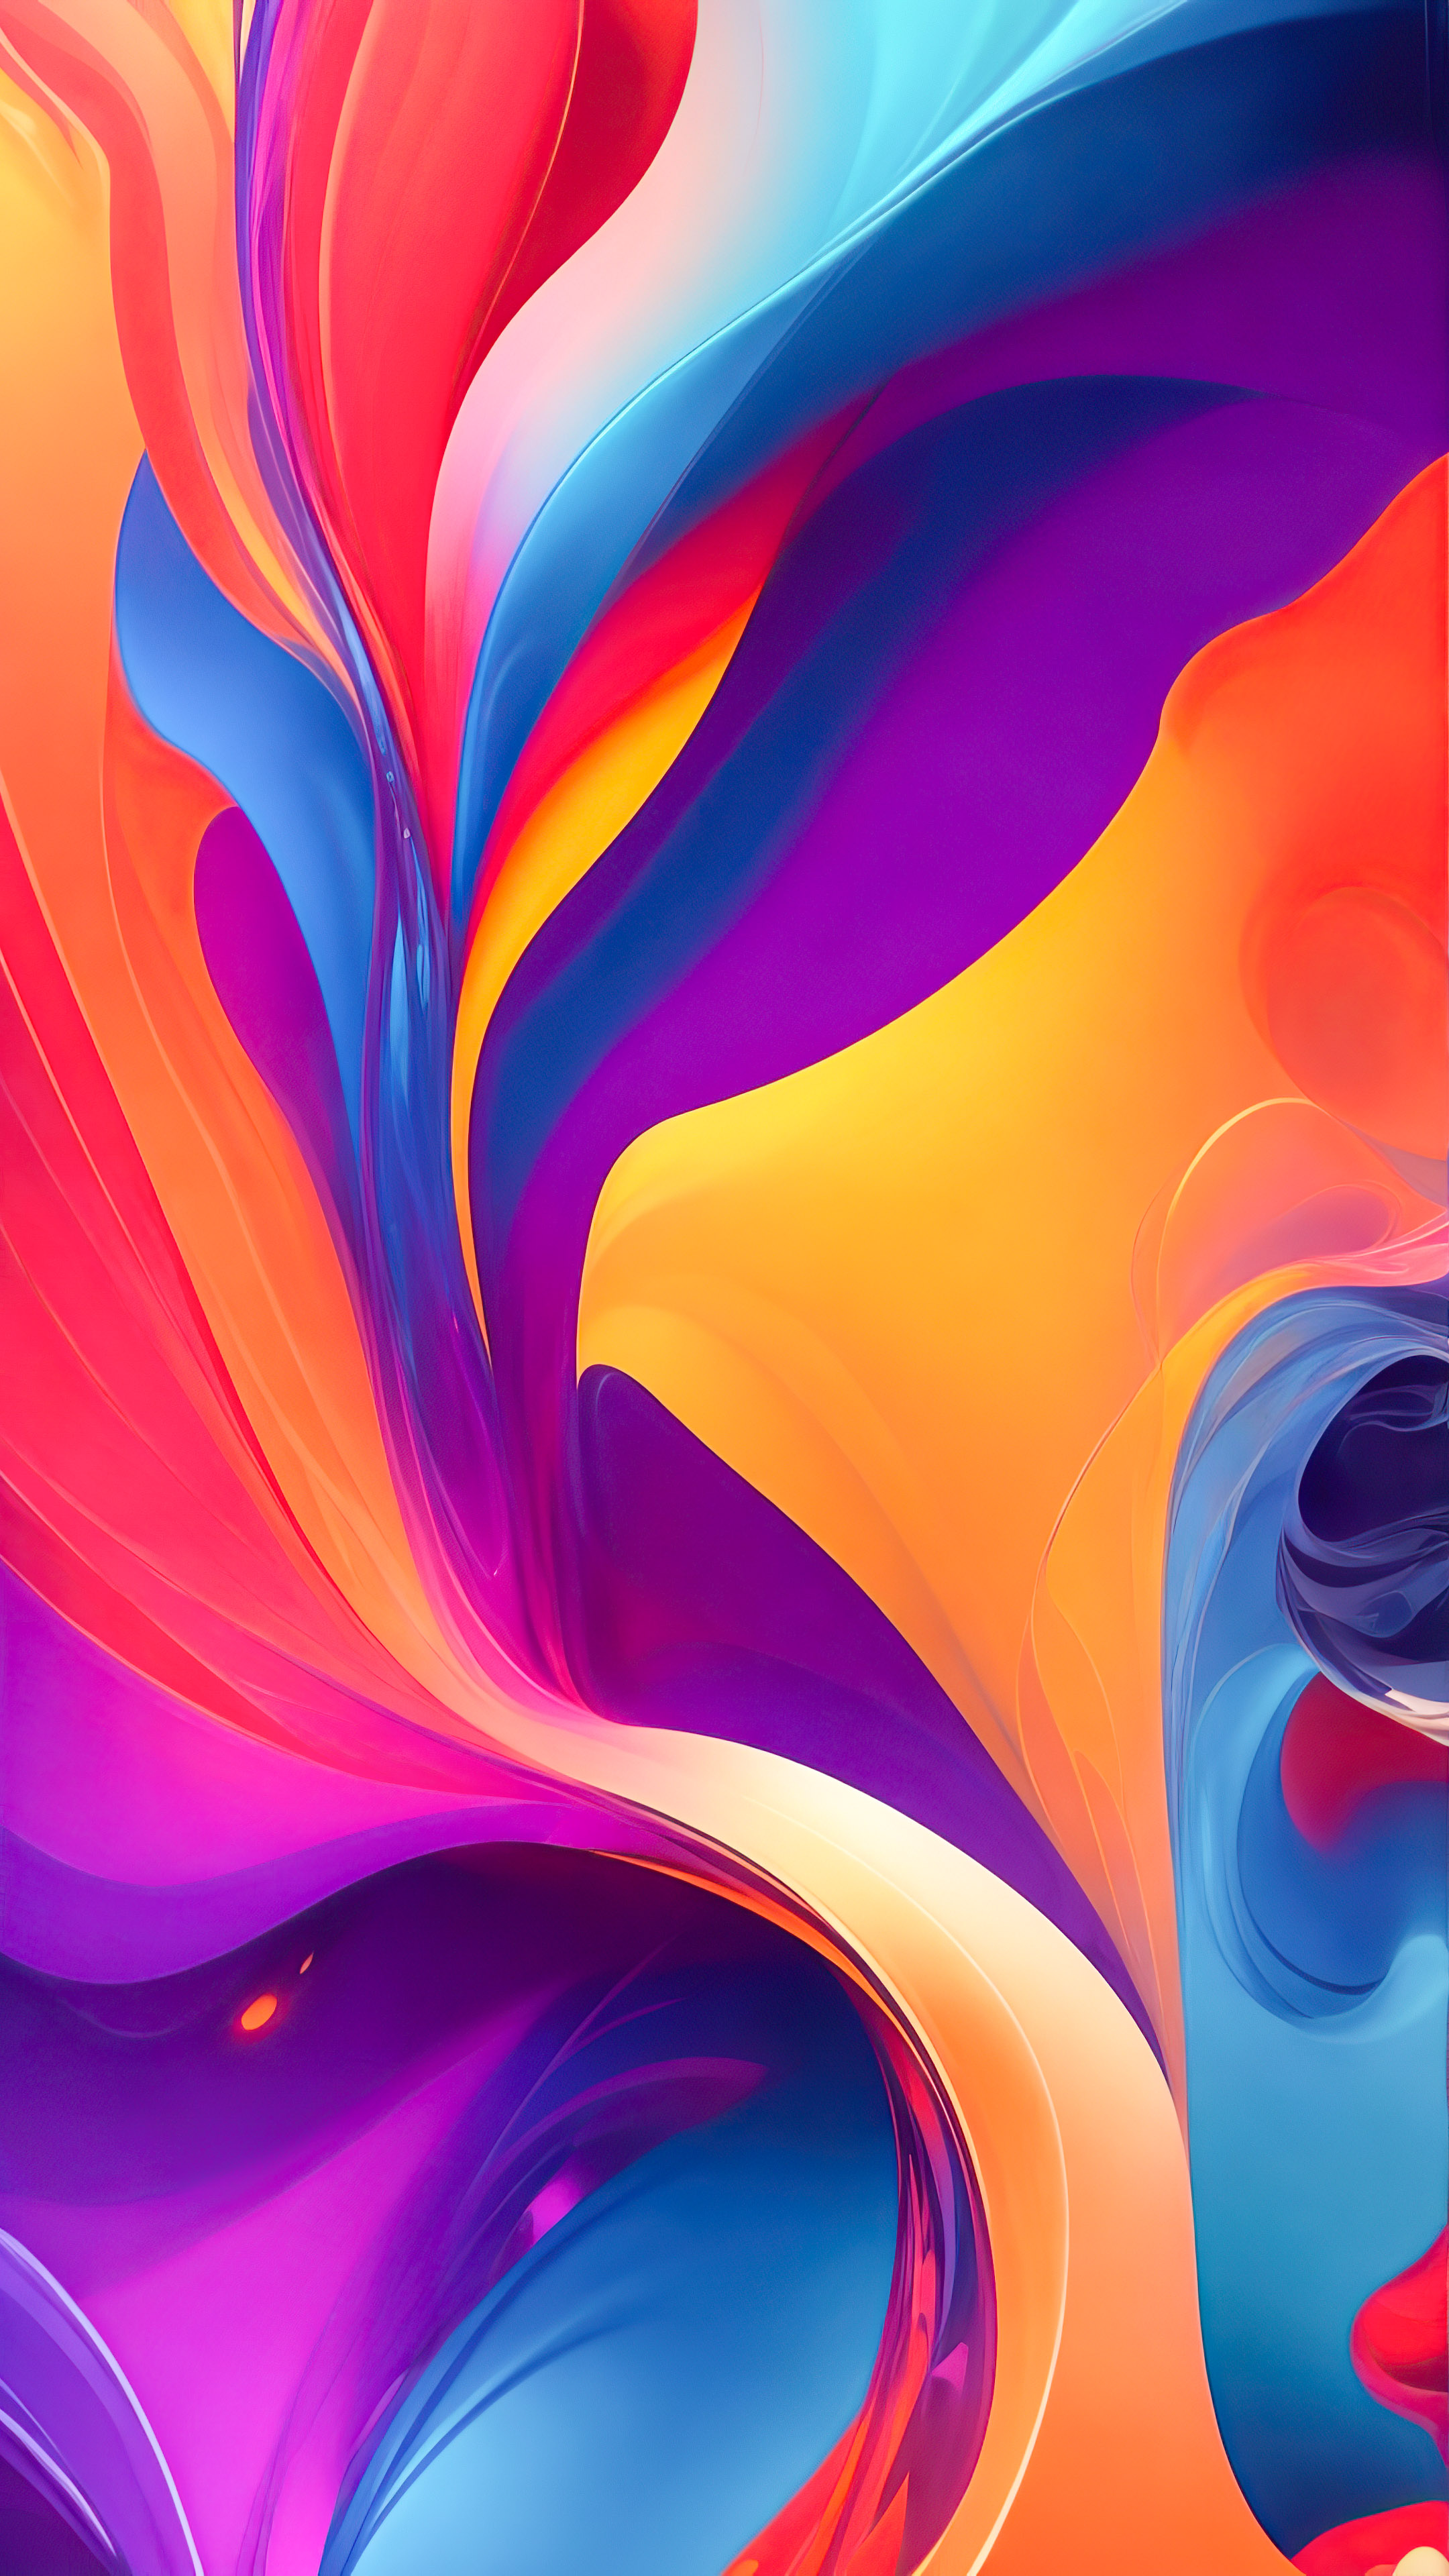 Immerse yourself in the world of chaos and spiritualism with iPhone ultra HD abstract wallpaper, boasting complex and colorful work.